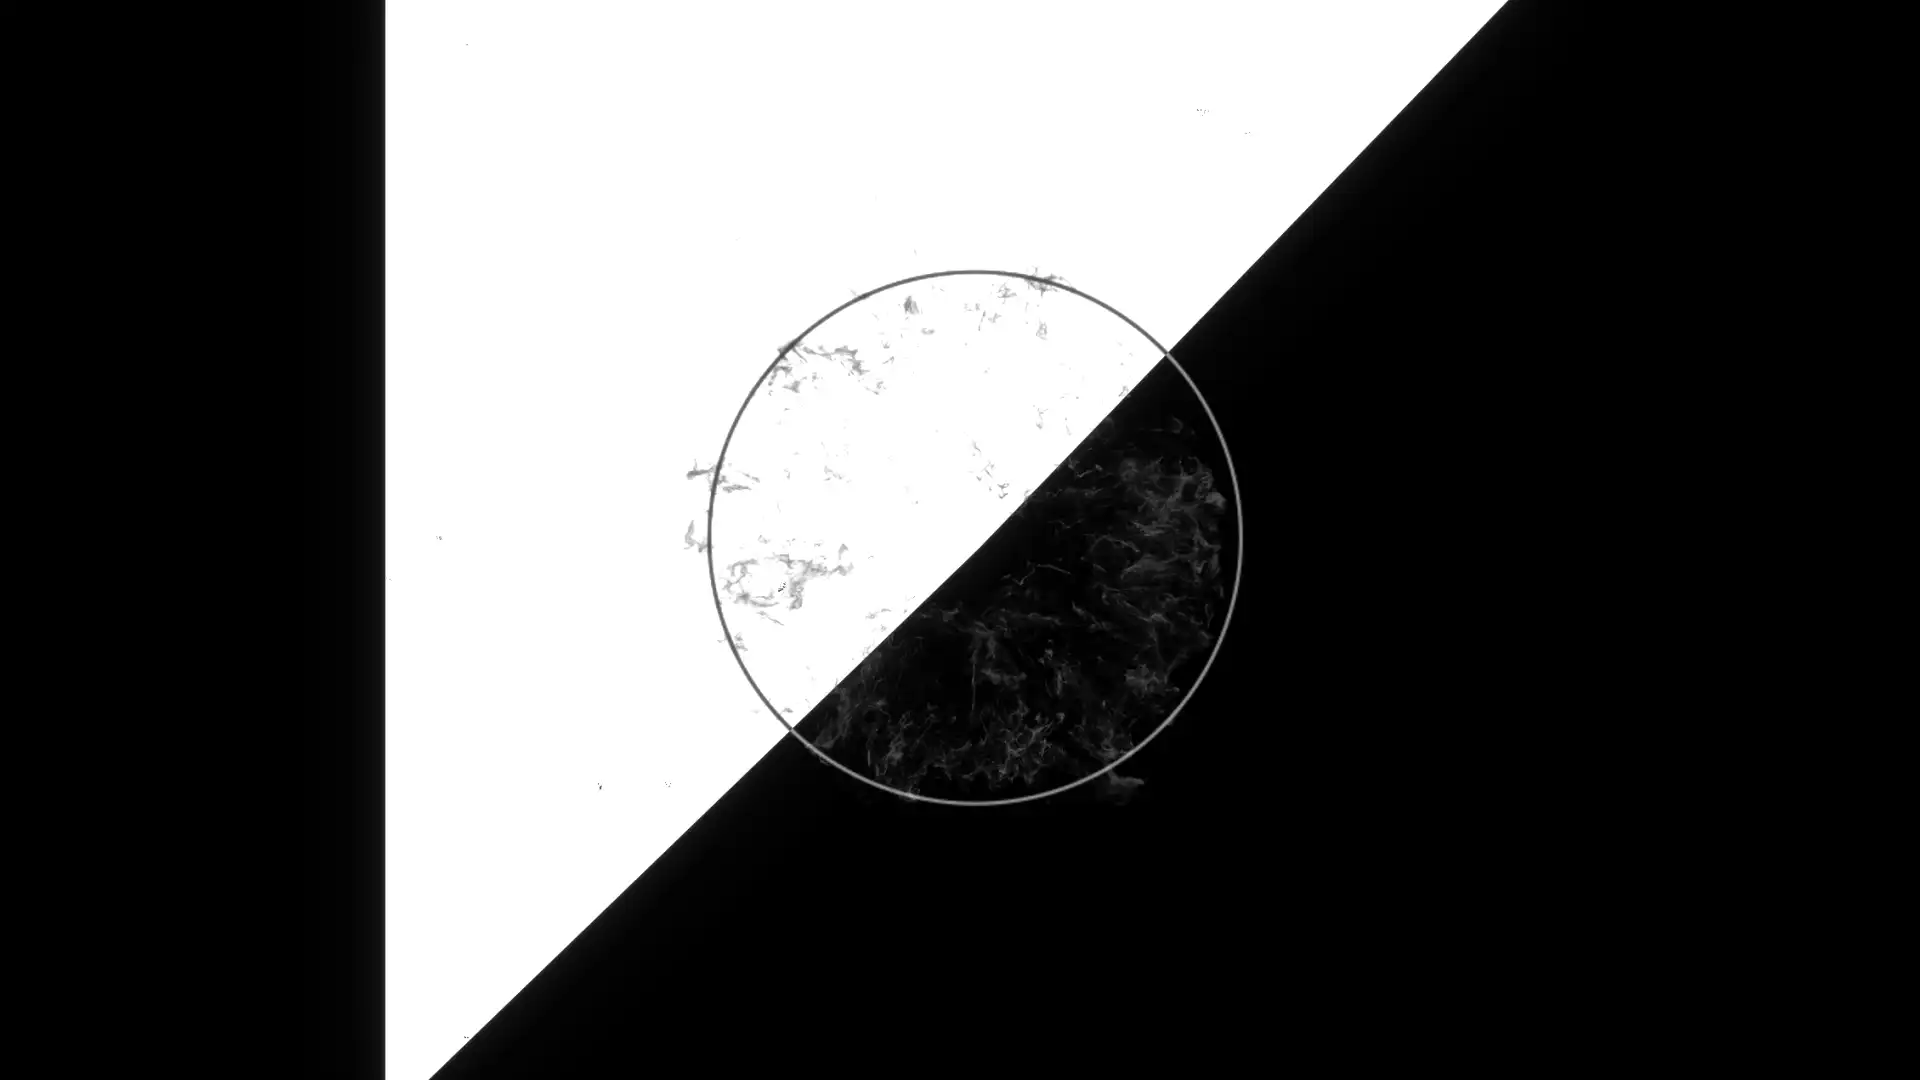 still image from the demo reel showing motion graphics in black and white. The middle of the mostly black frame is diagonally sliced with a white trangle. The middle has a circle outline and some cloud like details inside it.